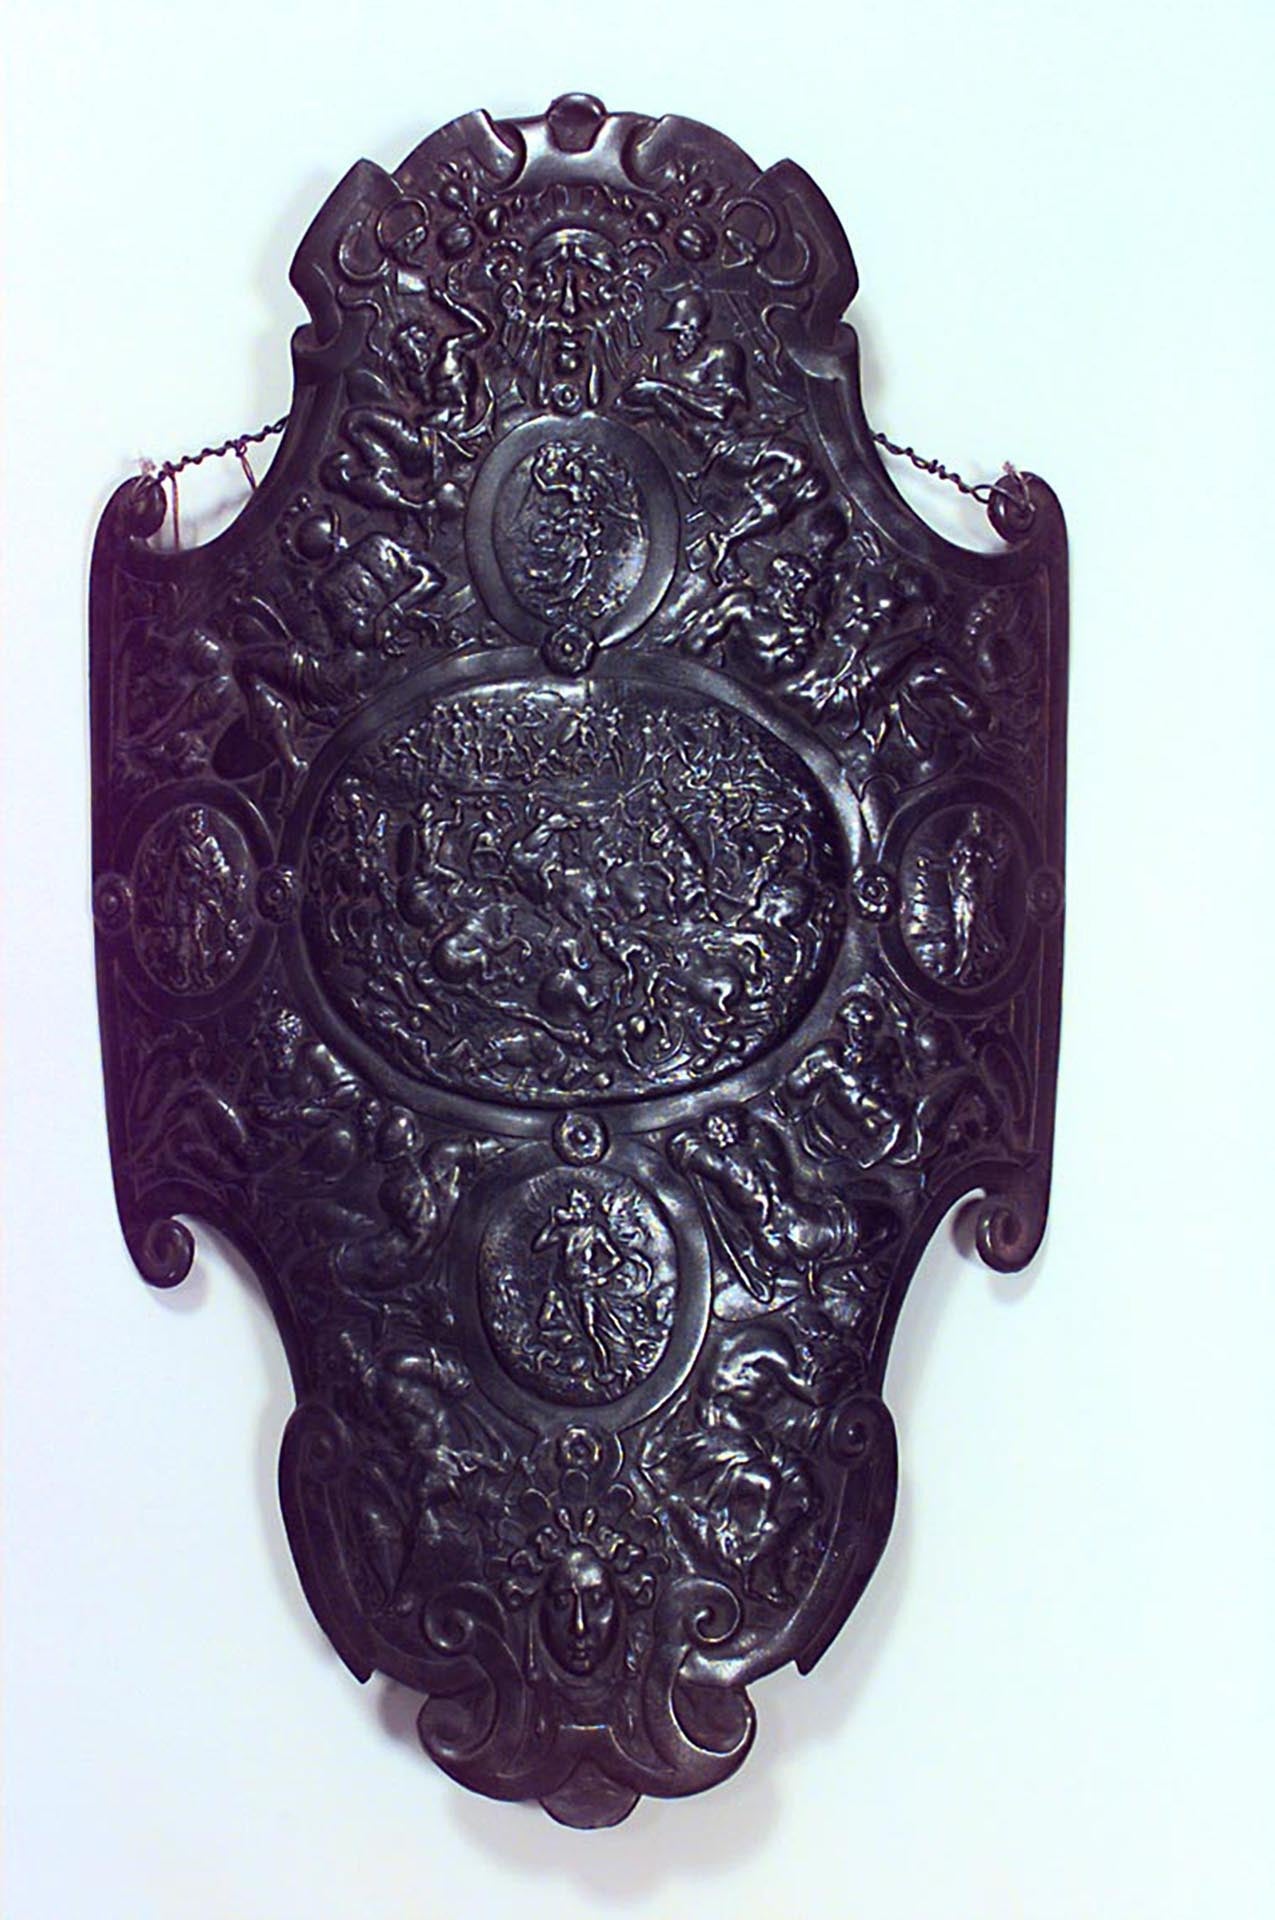 Italian Renaissance-style (20th Century) iron breast plate / wall plaque with figures and scenes in relief.
